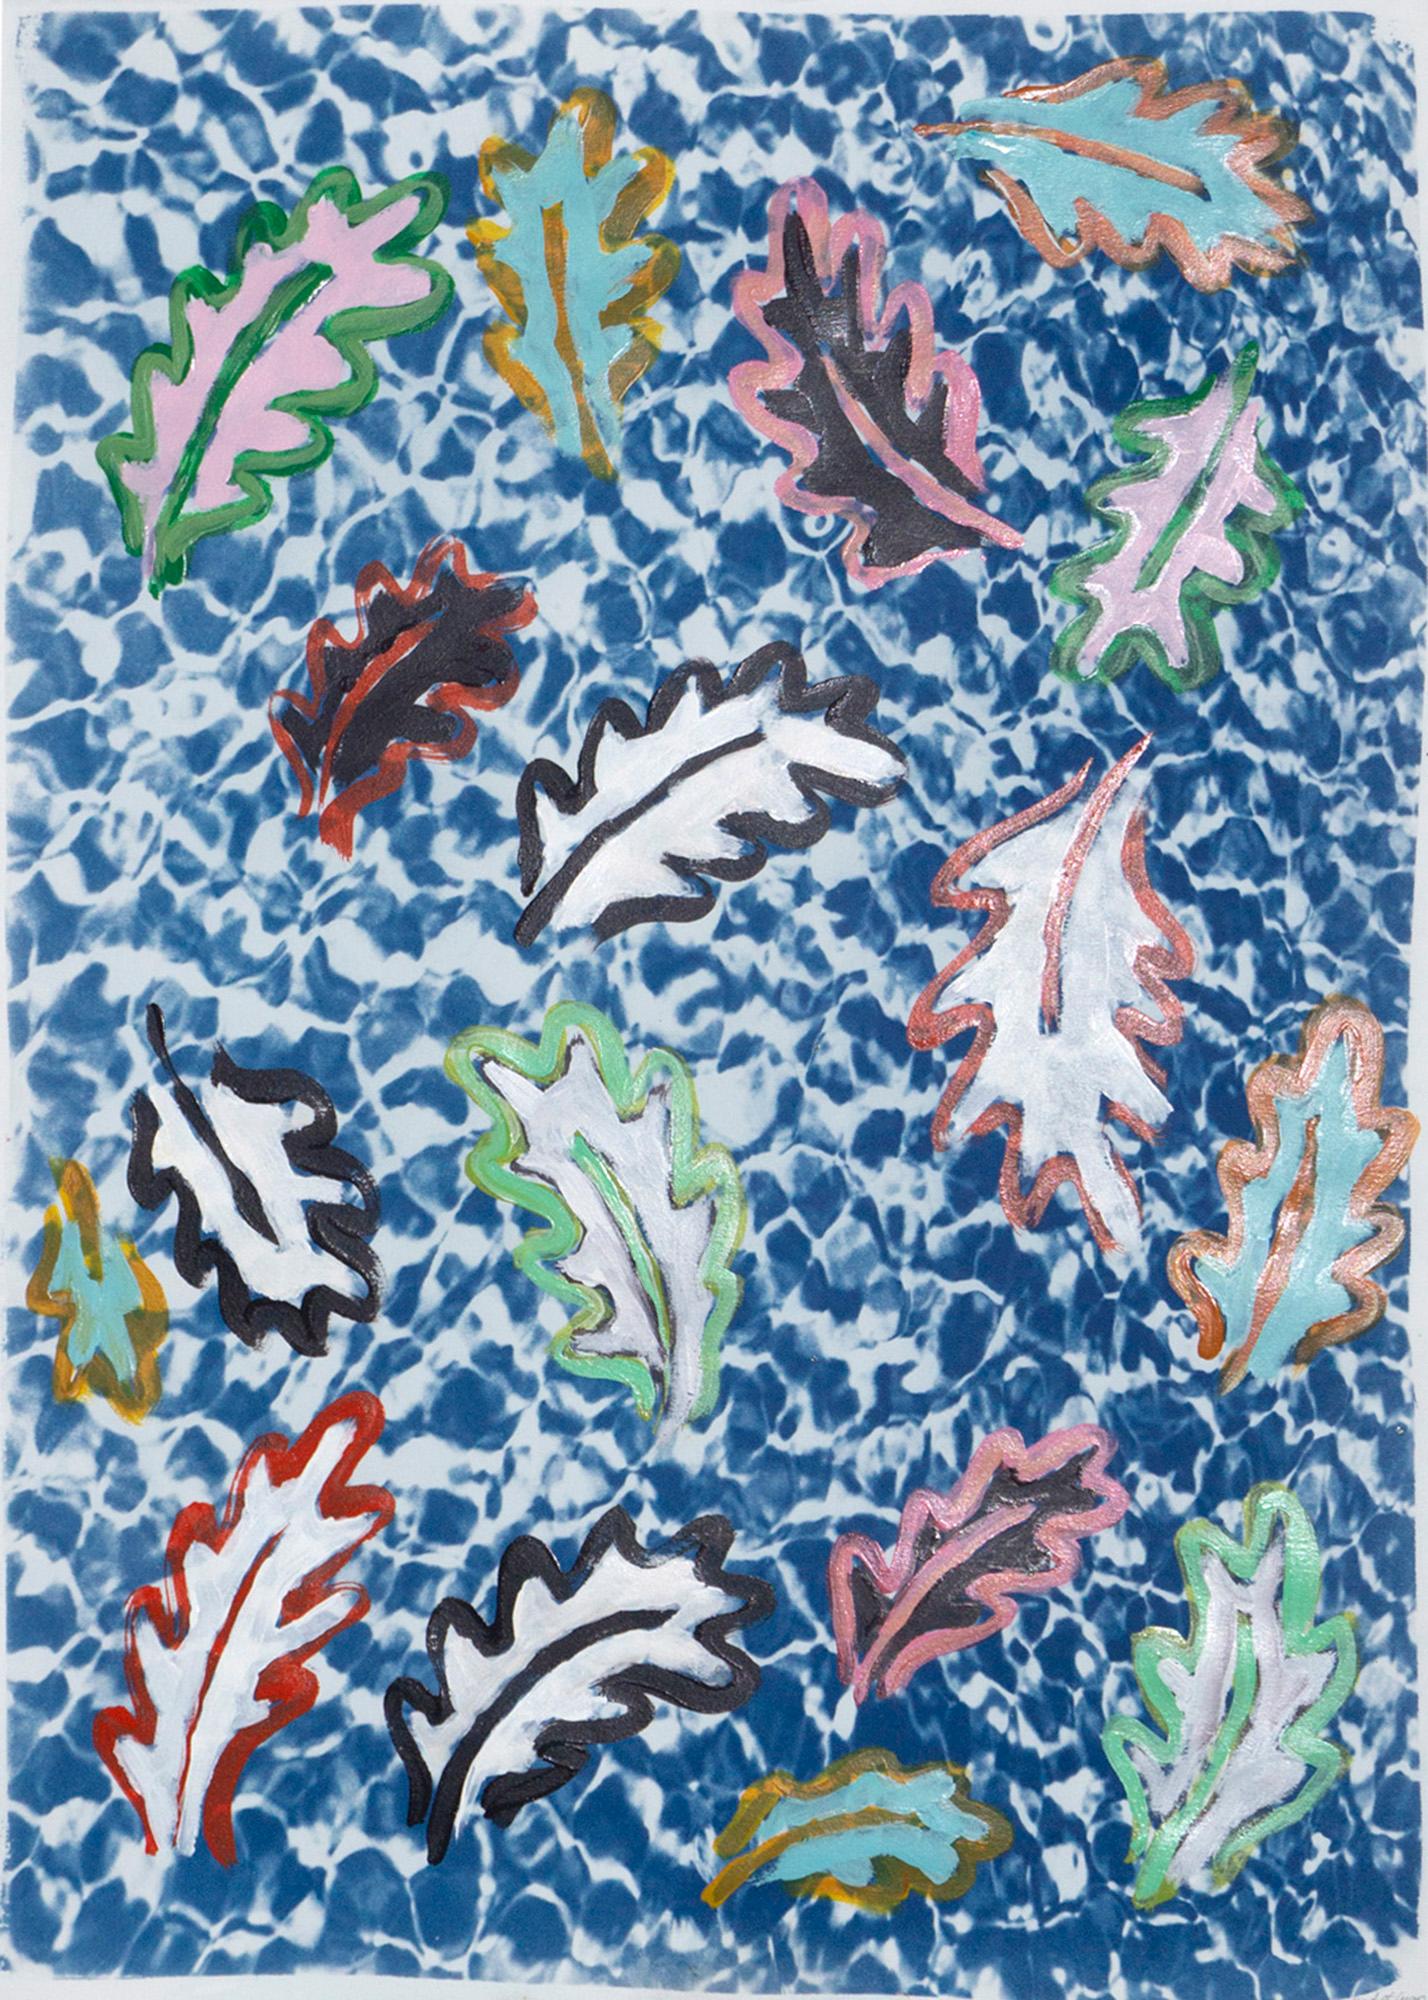 "Botanical Leaves Floating on a Pool" 50x70cm, Colorful Mixed Media on Cyanotype